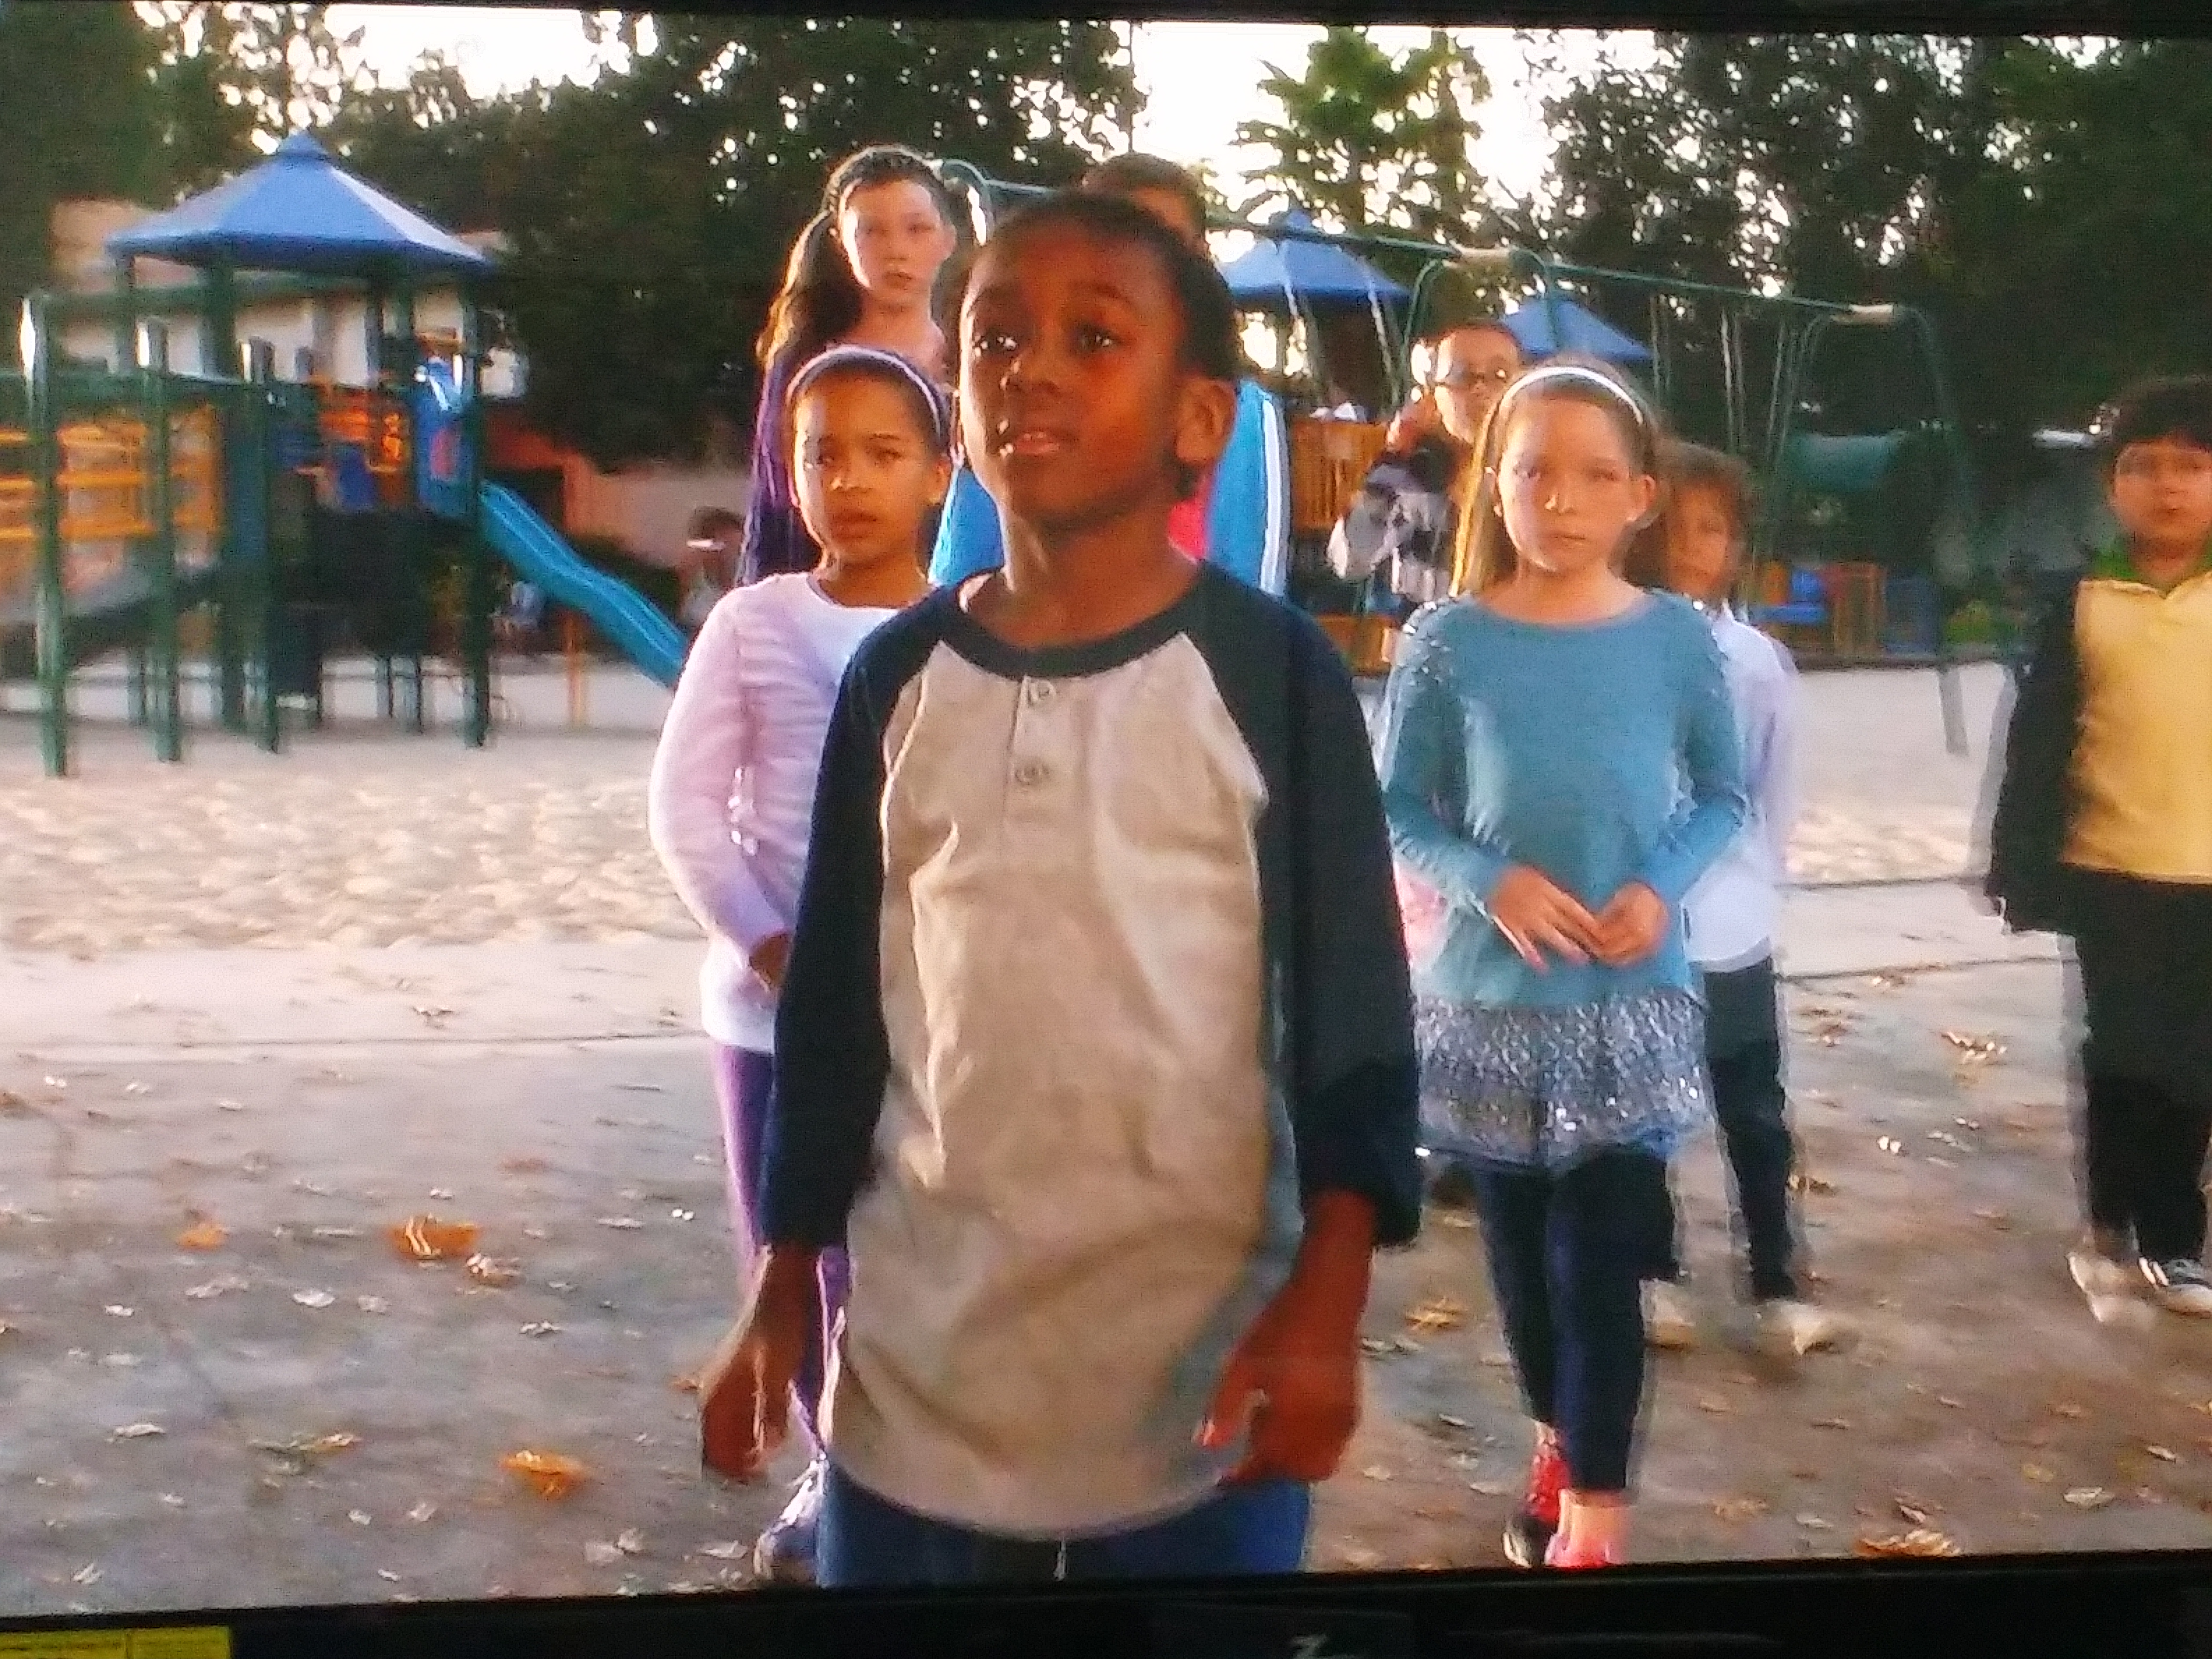 It's me in the Hit ABC TV show The Neighbors. The Challoweenukah episode filmed and aired in 2013.